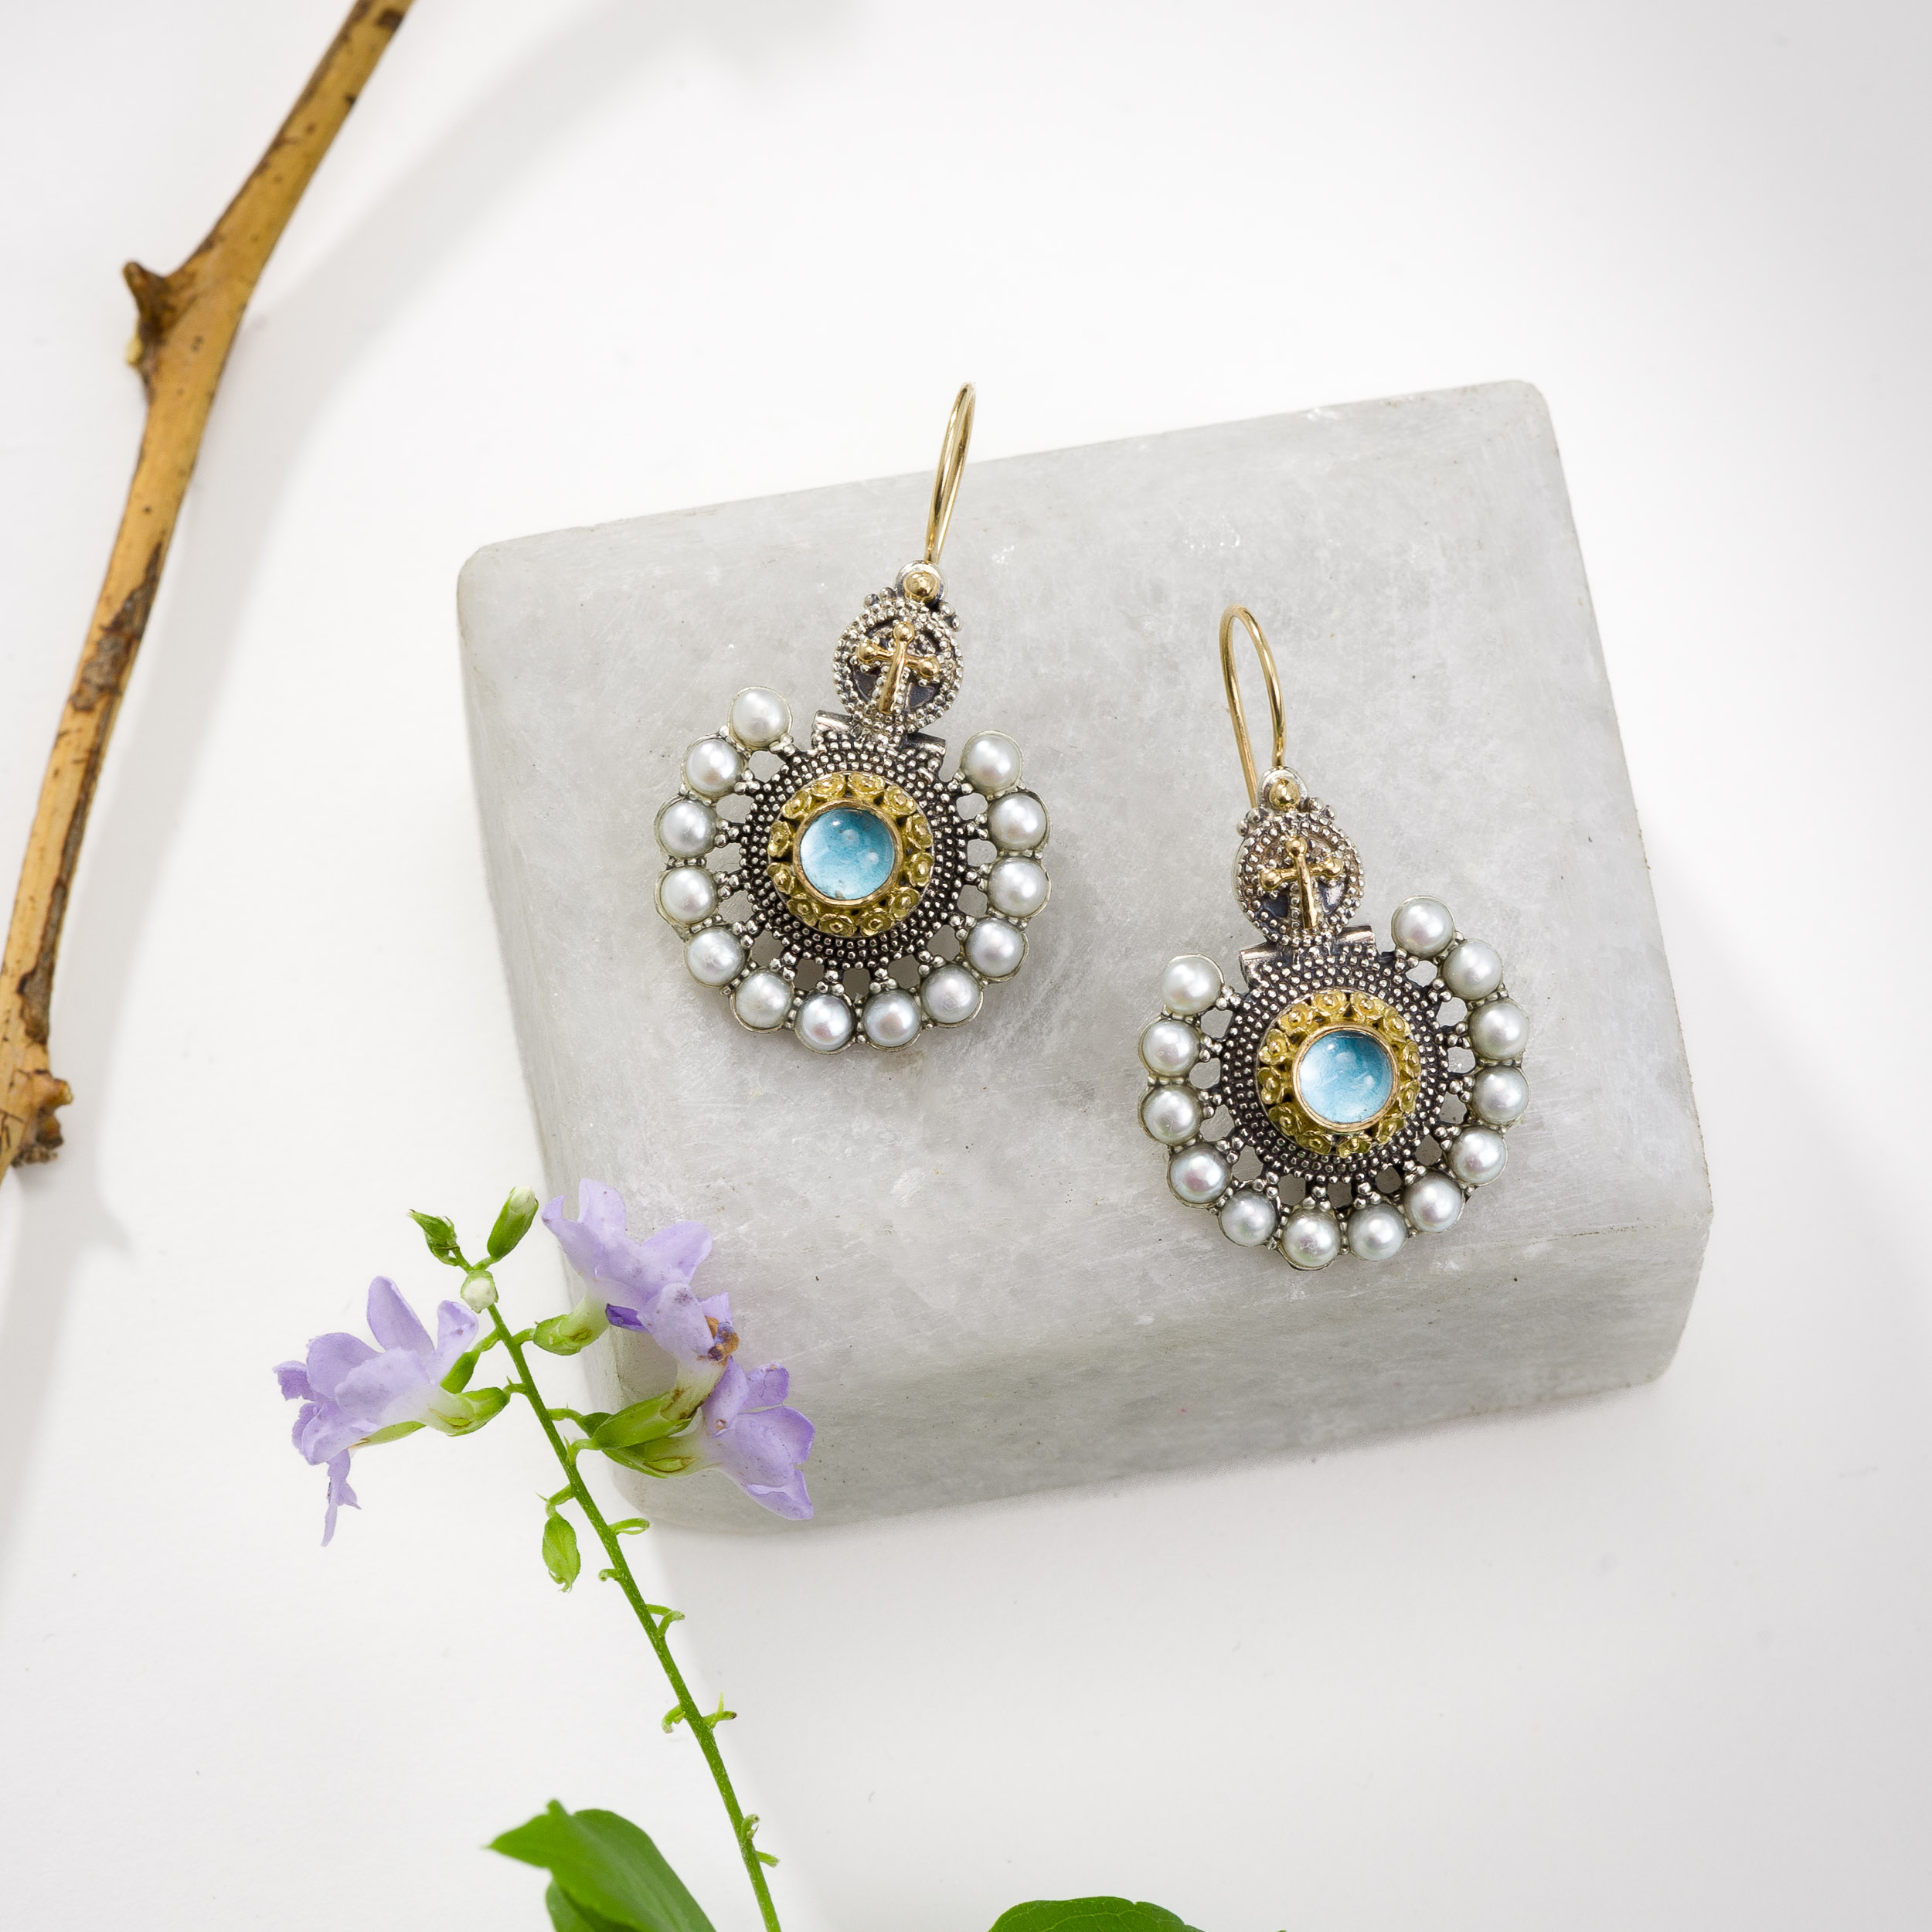 Athenian Flower Peacock Earrings in 18K Gold and Sterling Silver with Aquamarine